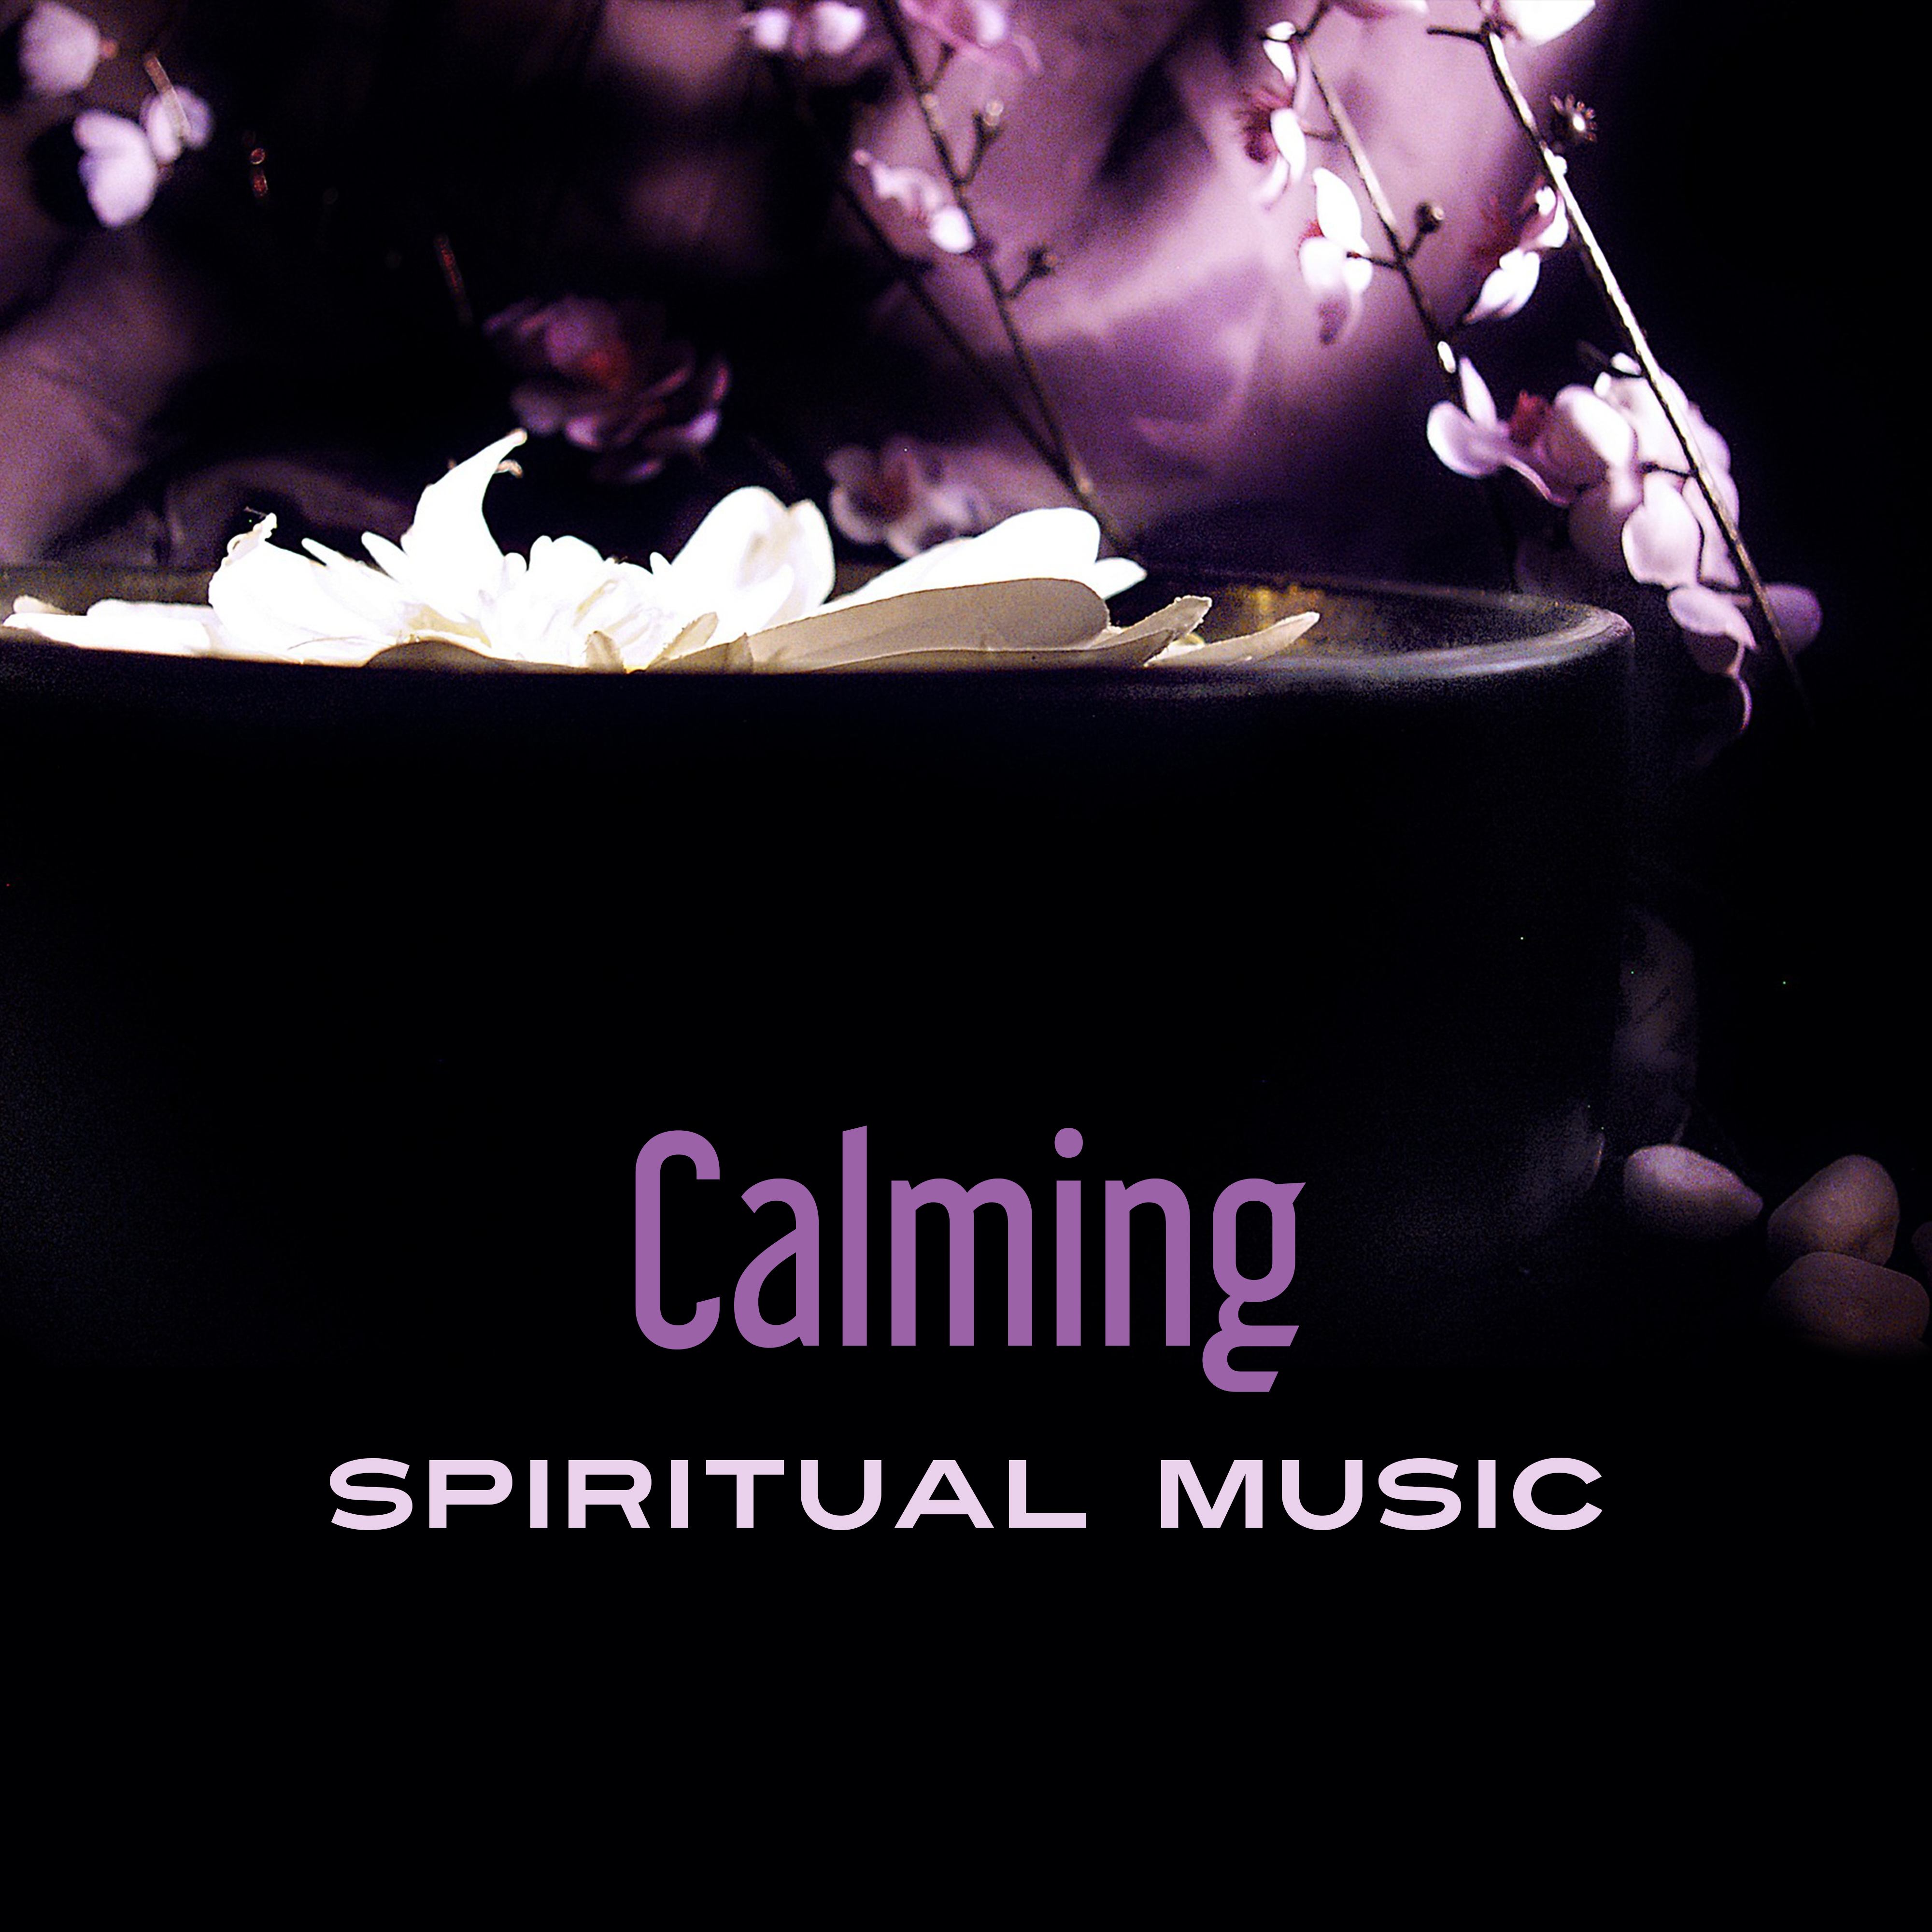 Calming Spiritual Music  Rest with New Age Music, Spirit Journey, Meditation Music, Sounds to Relax